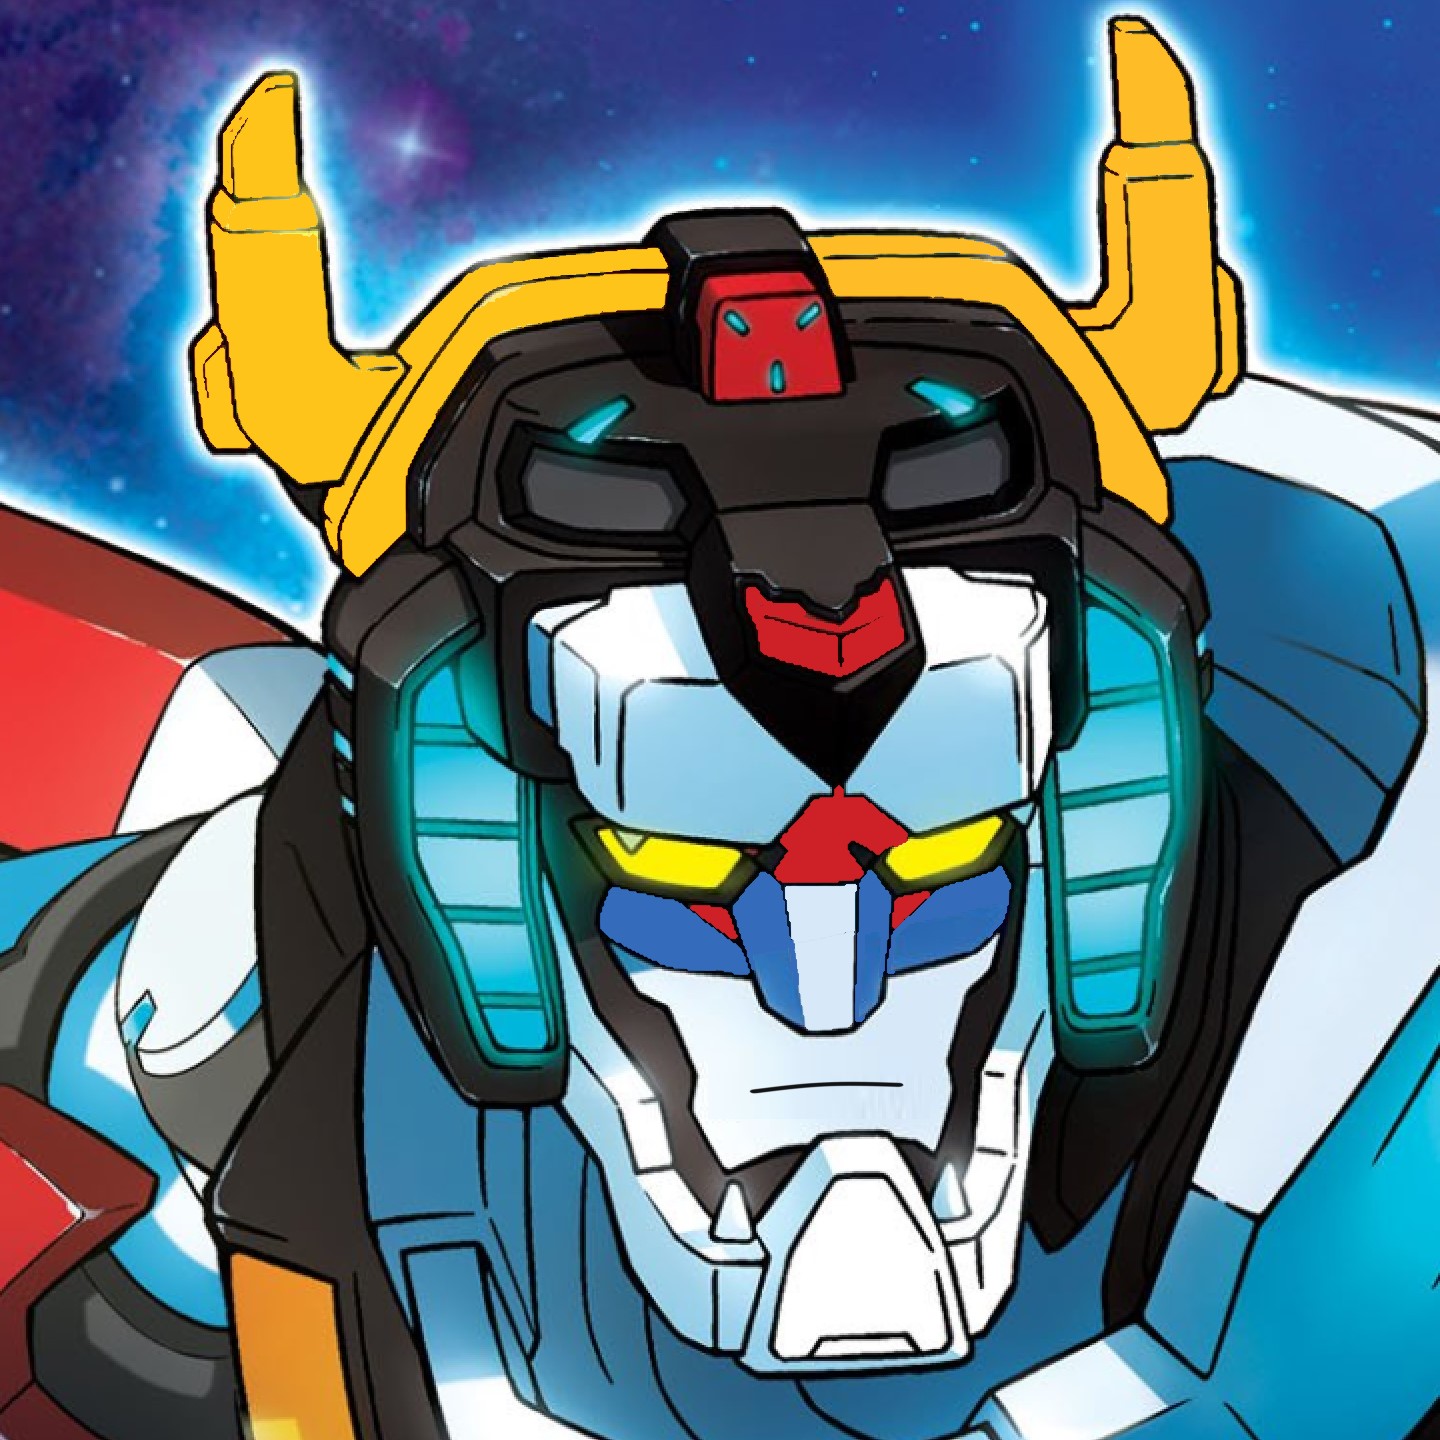 Voltron The Lion Robot Is Serious With Icon by Voltron5051 on DeviantArt